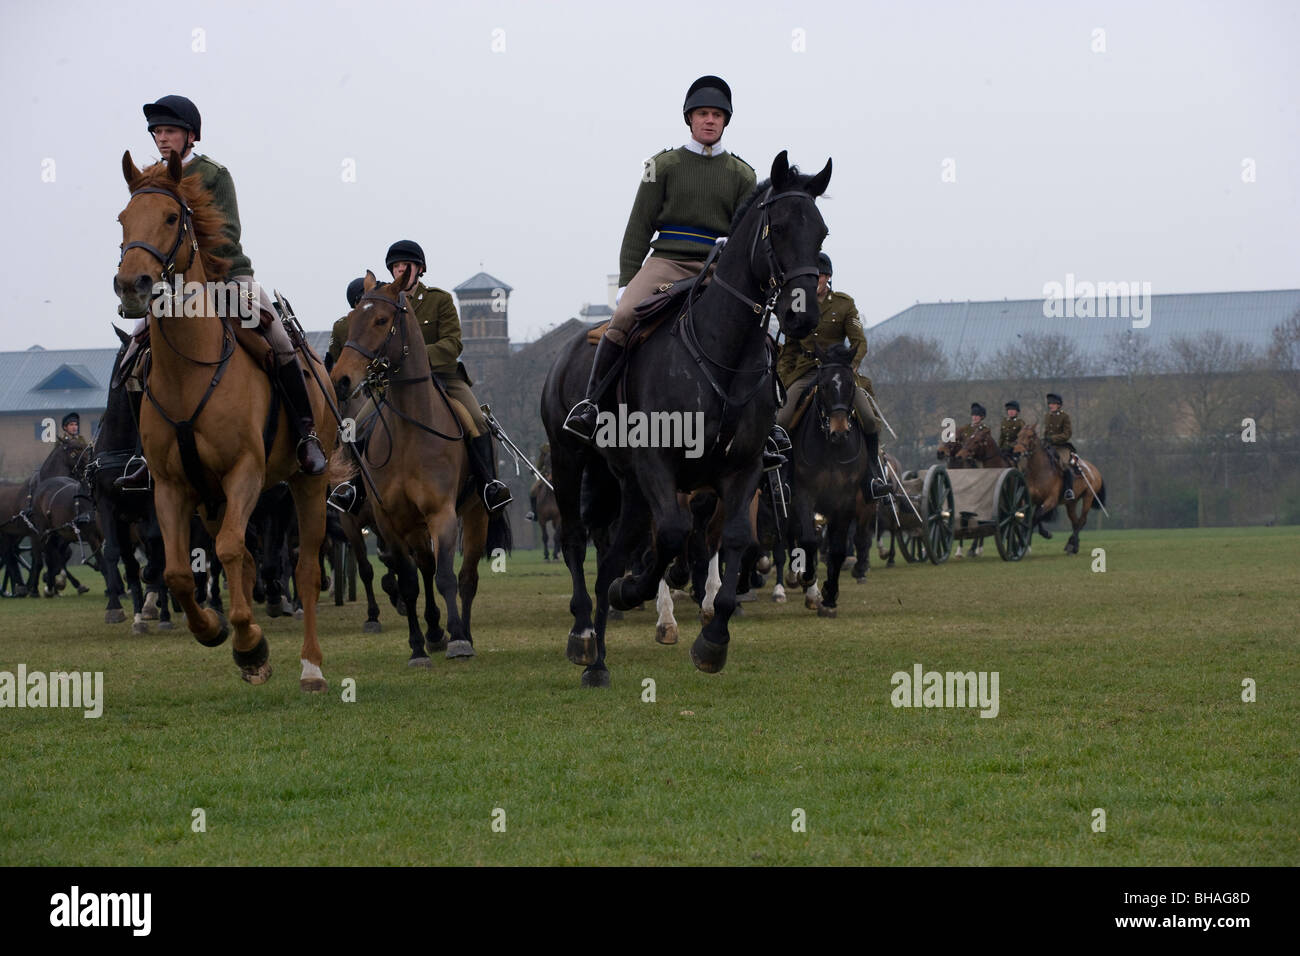 King's Troop Royal Horse Artillery England army Stock Photo